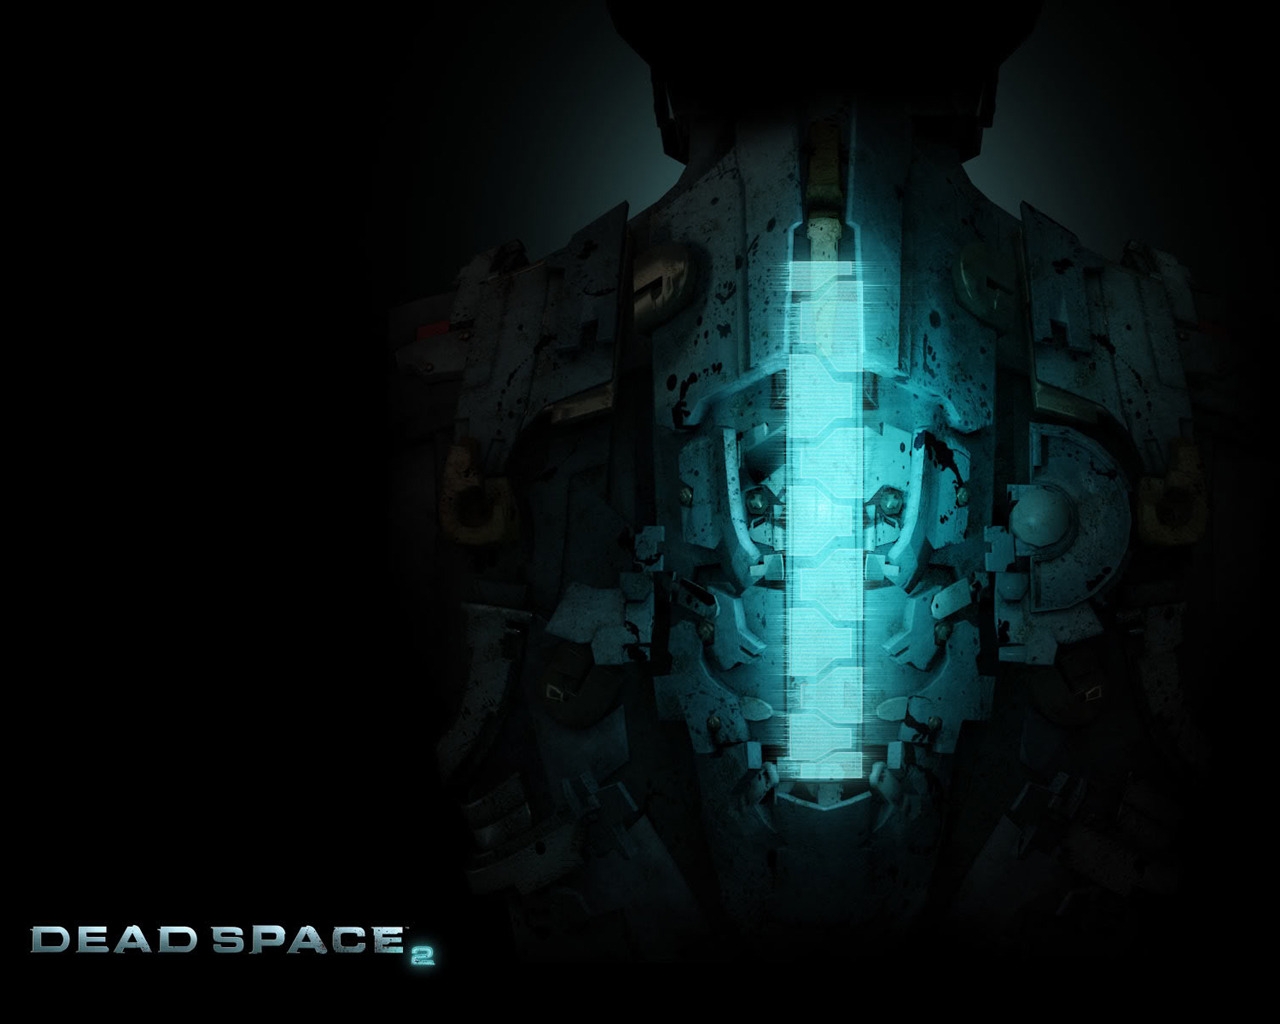 Dead Space 2 Art for 1280 x 1024 resolution